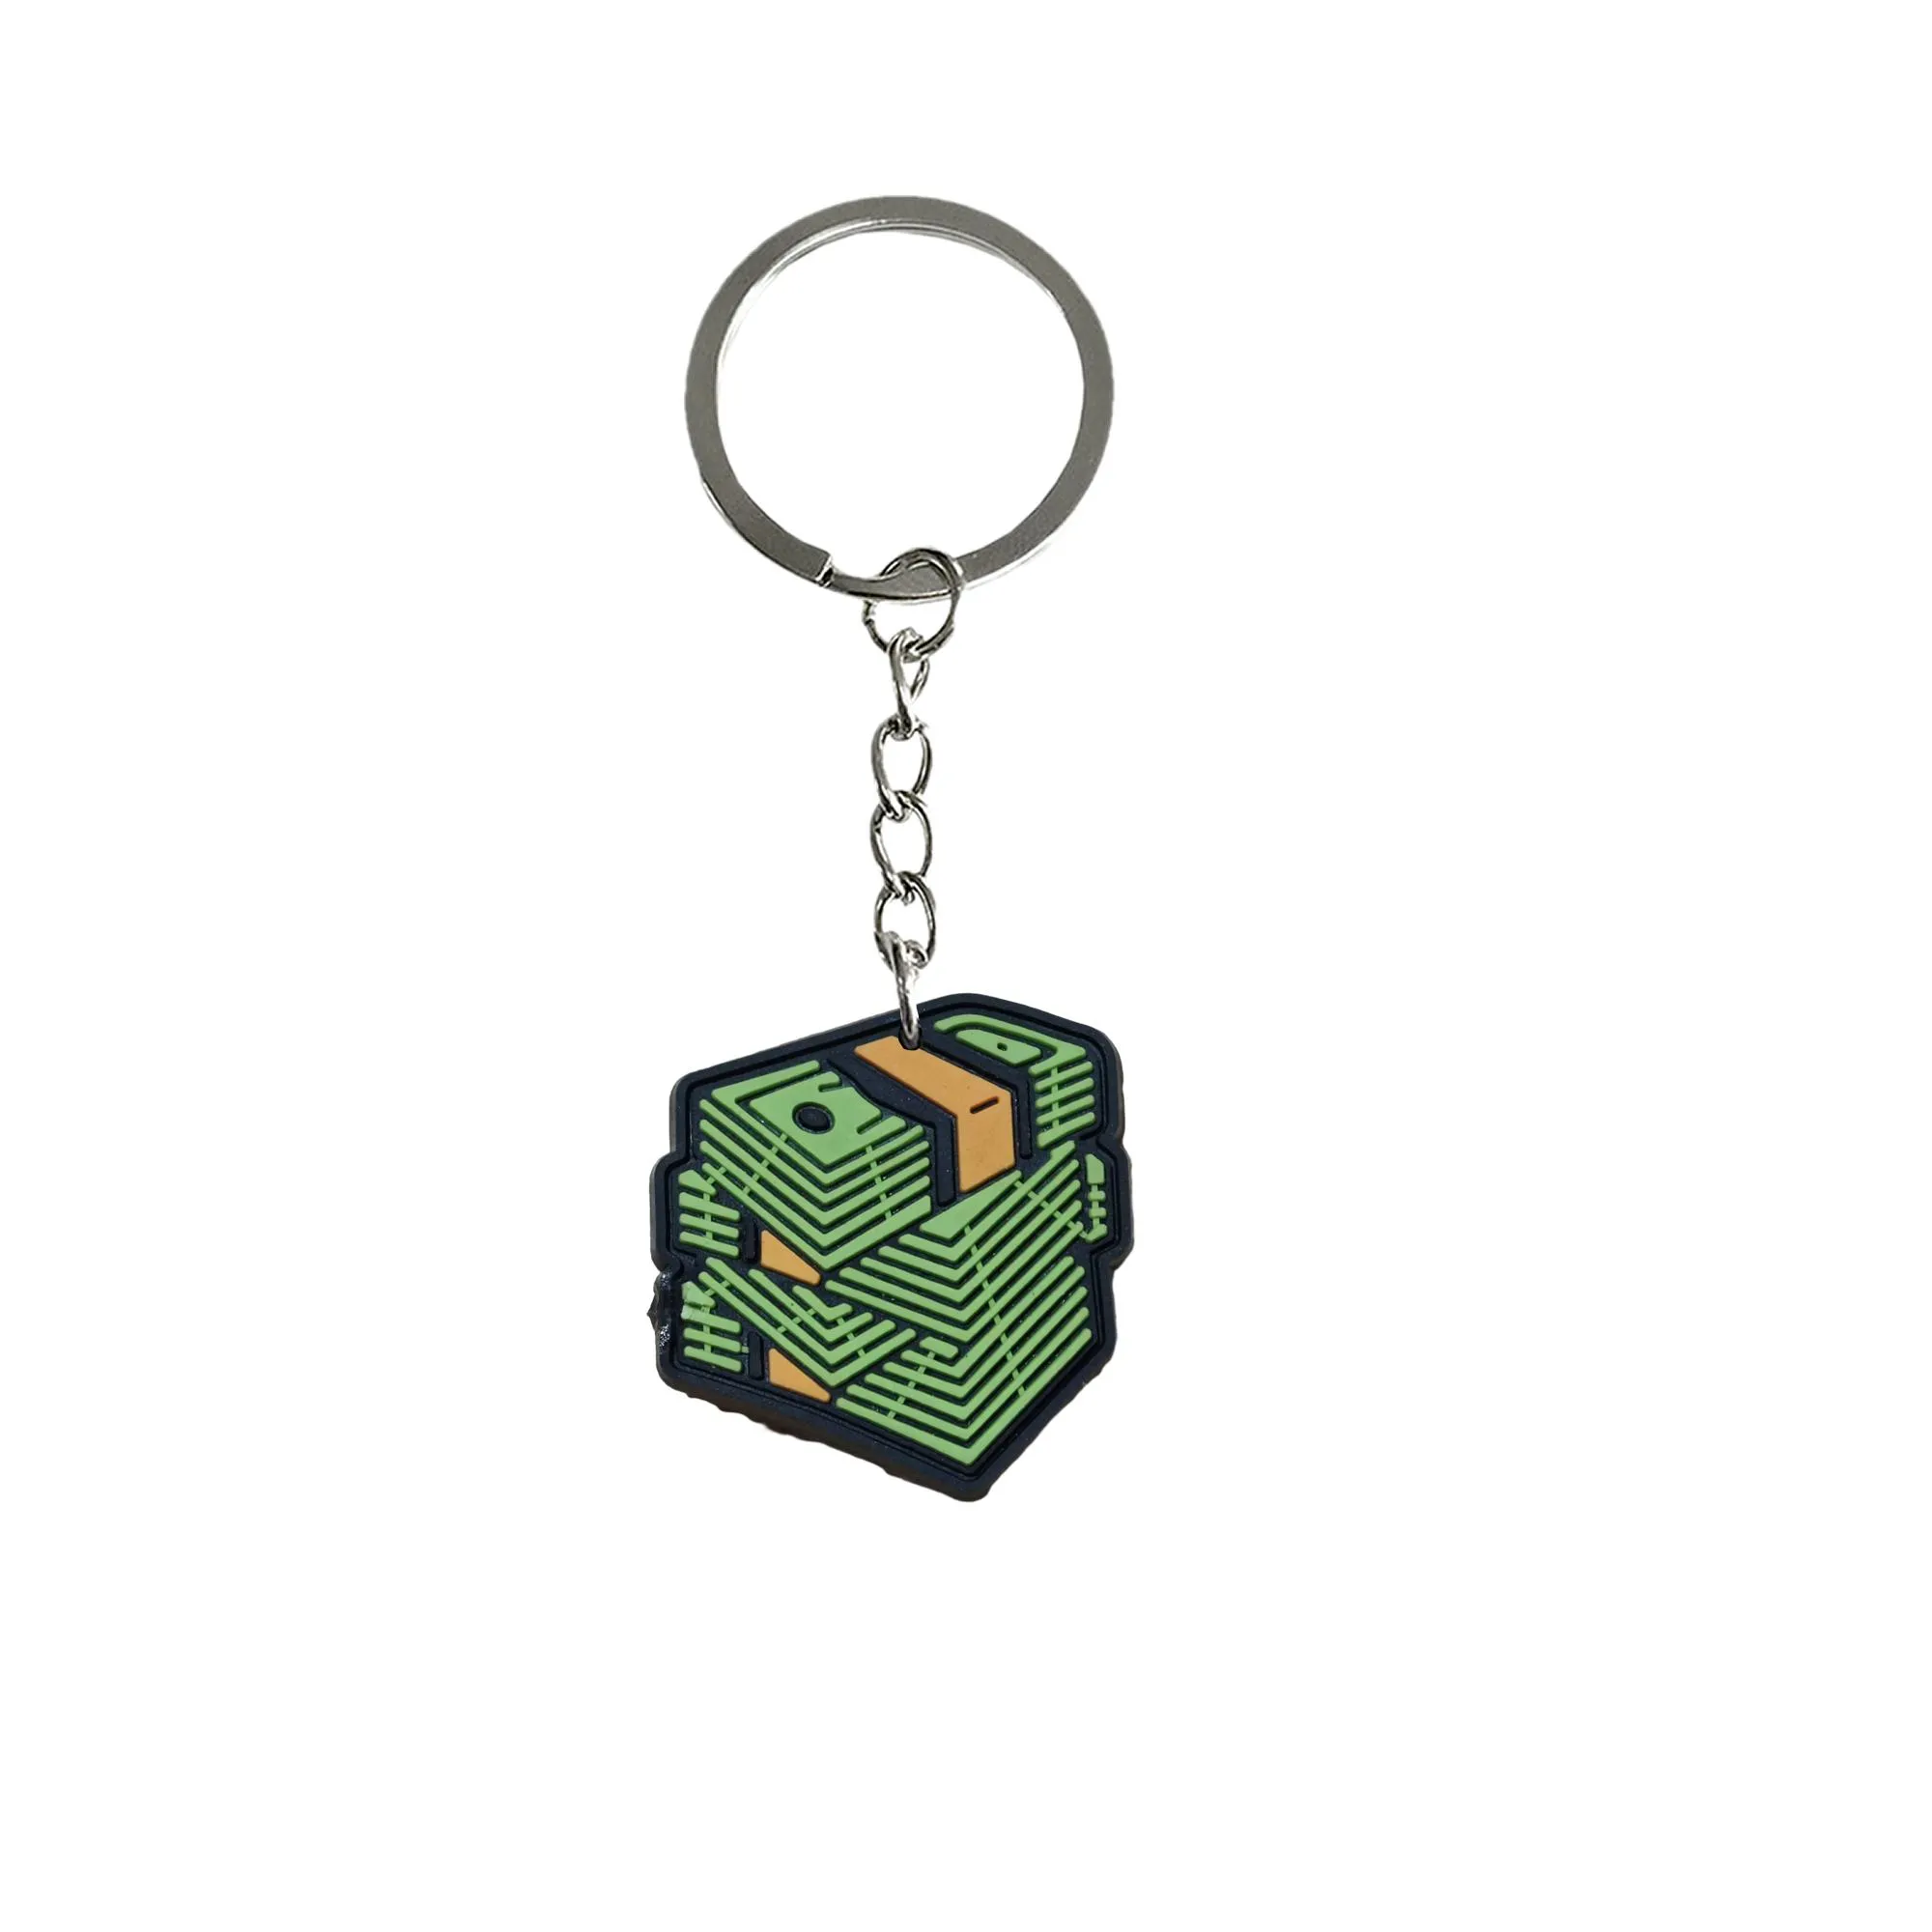 money keychain for kids party favors keyring men keychains school day birthday supplies gift suitable schoolbag women key chain girls